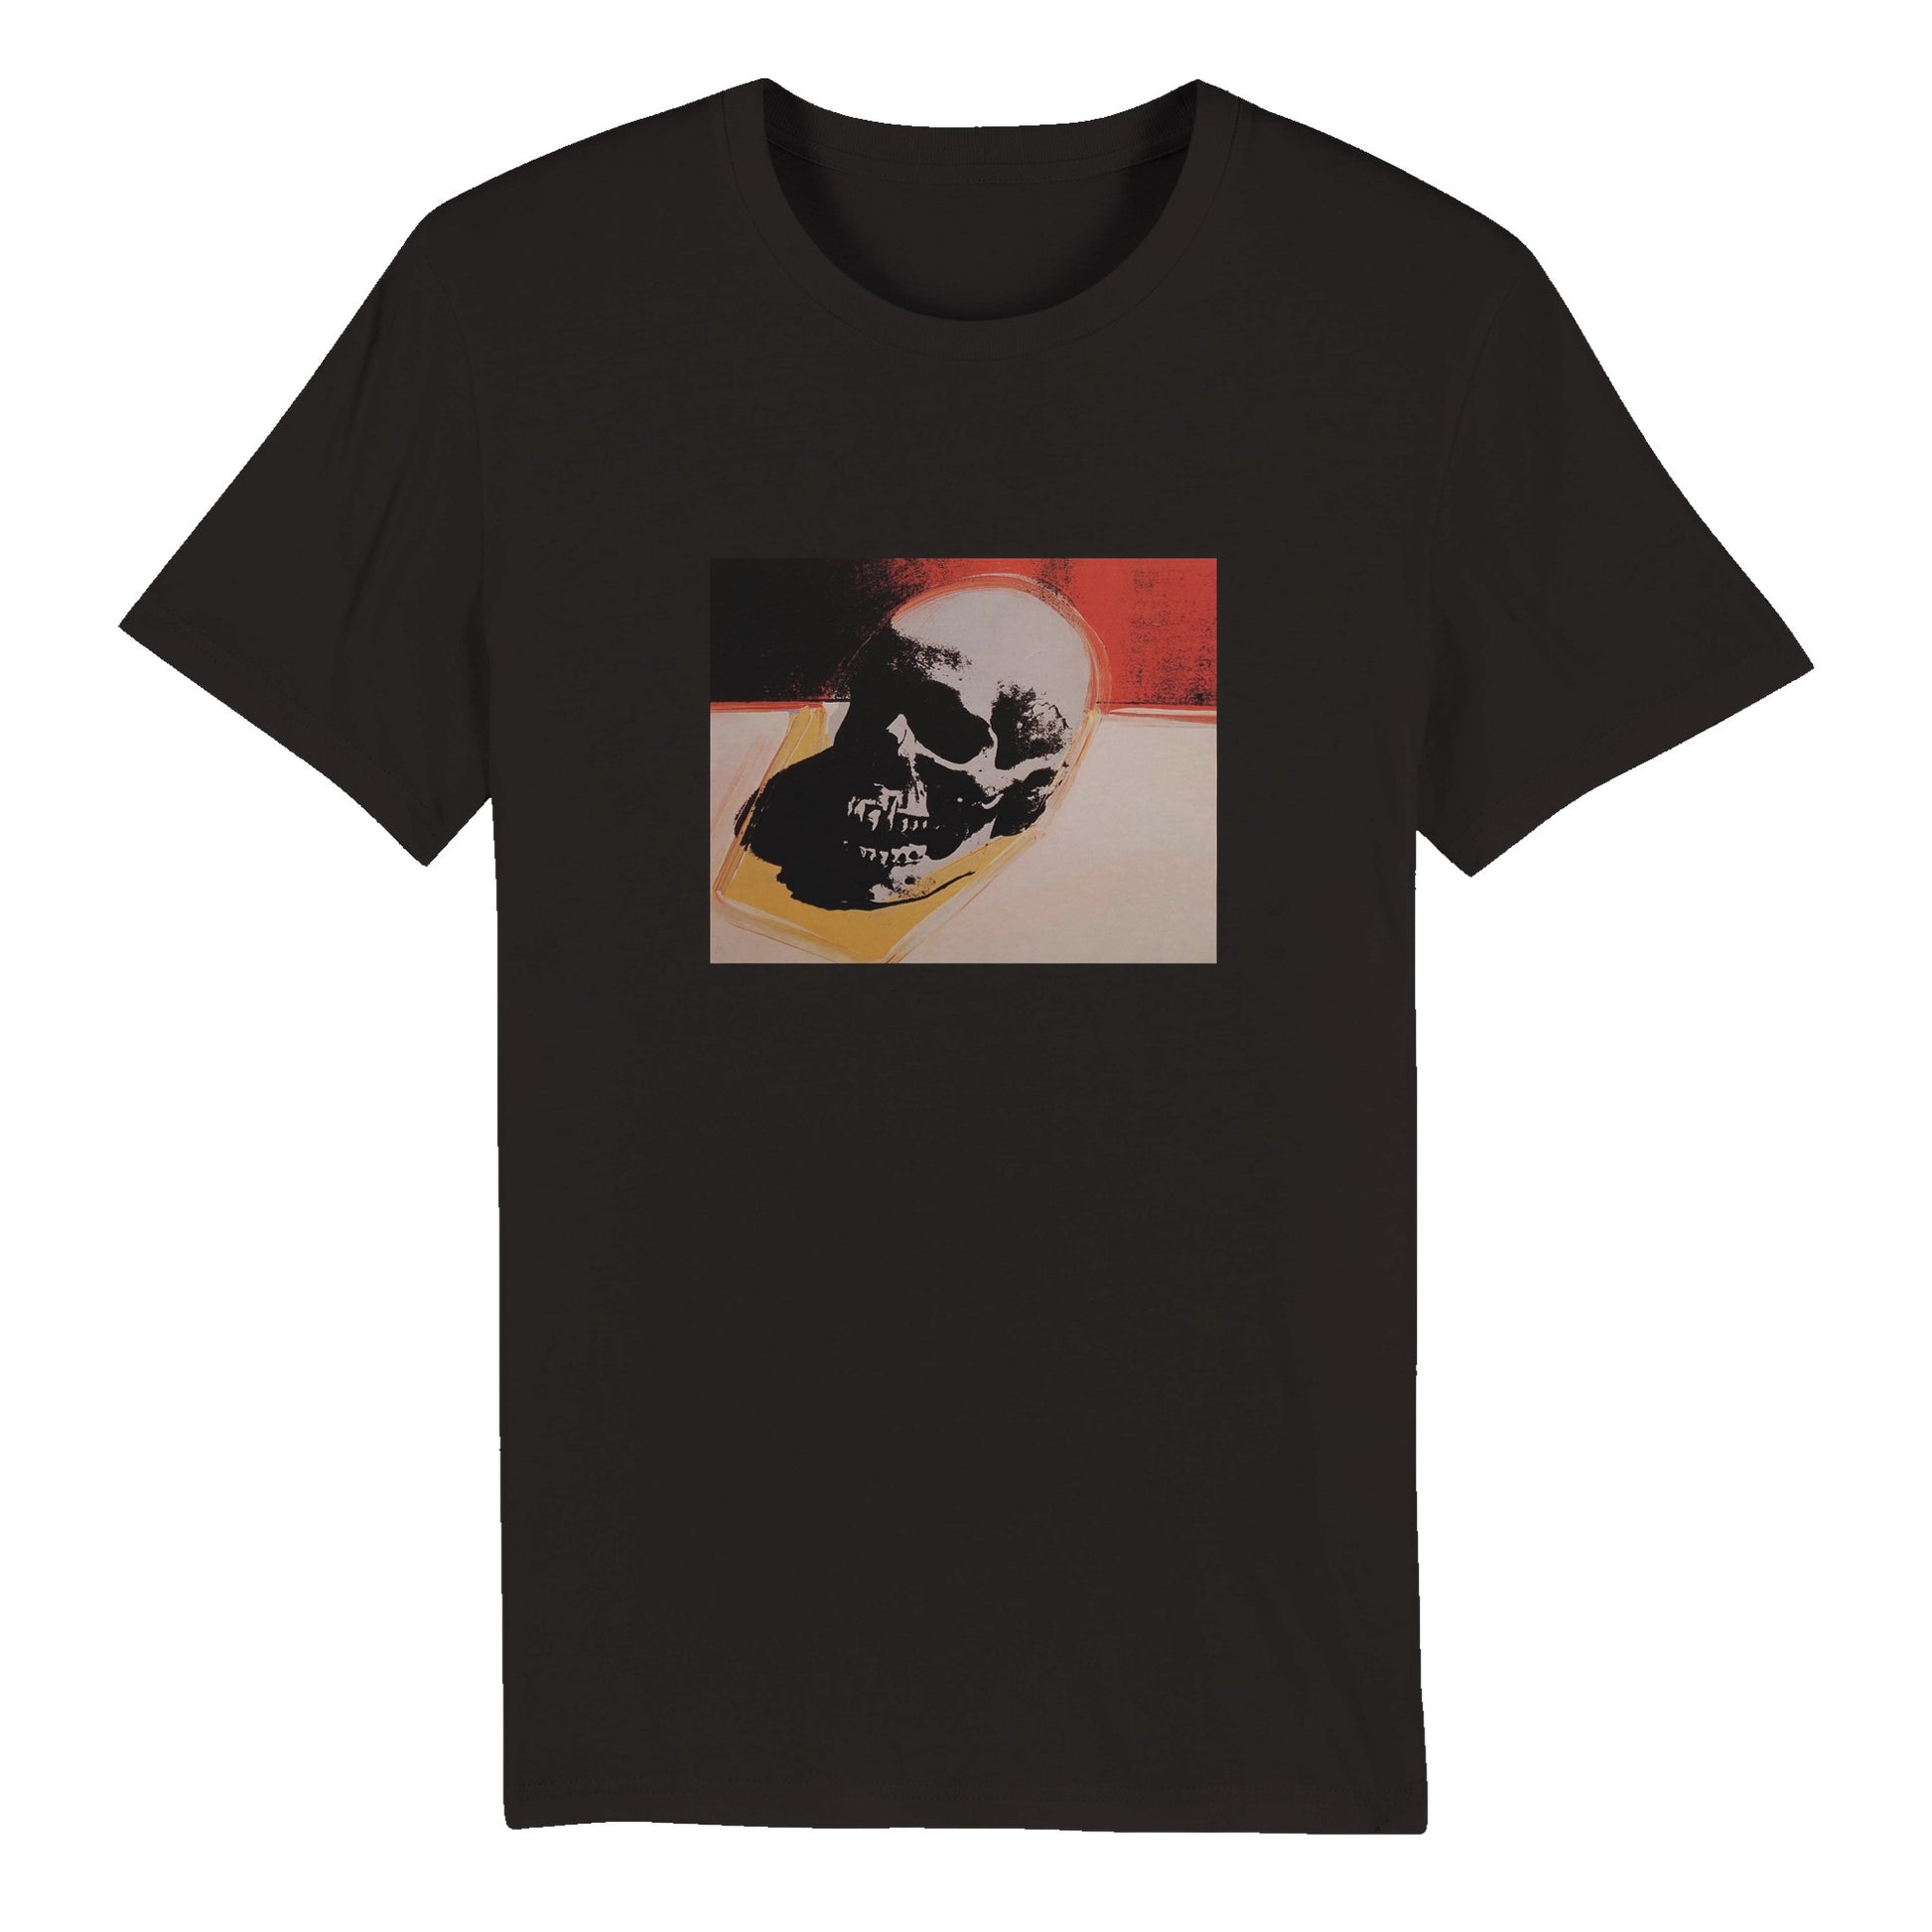 ANDY WARHOL - THE SCULL - ORGANIC UNISEX T-SHIRT